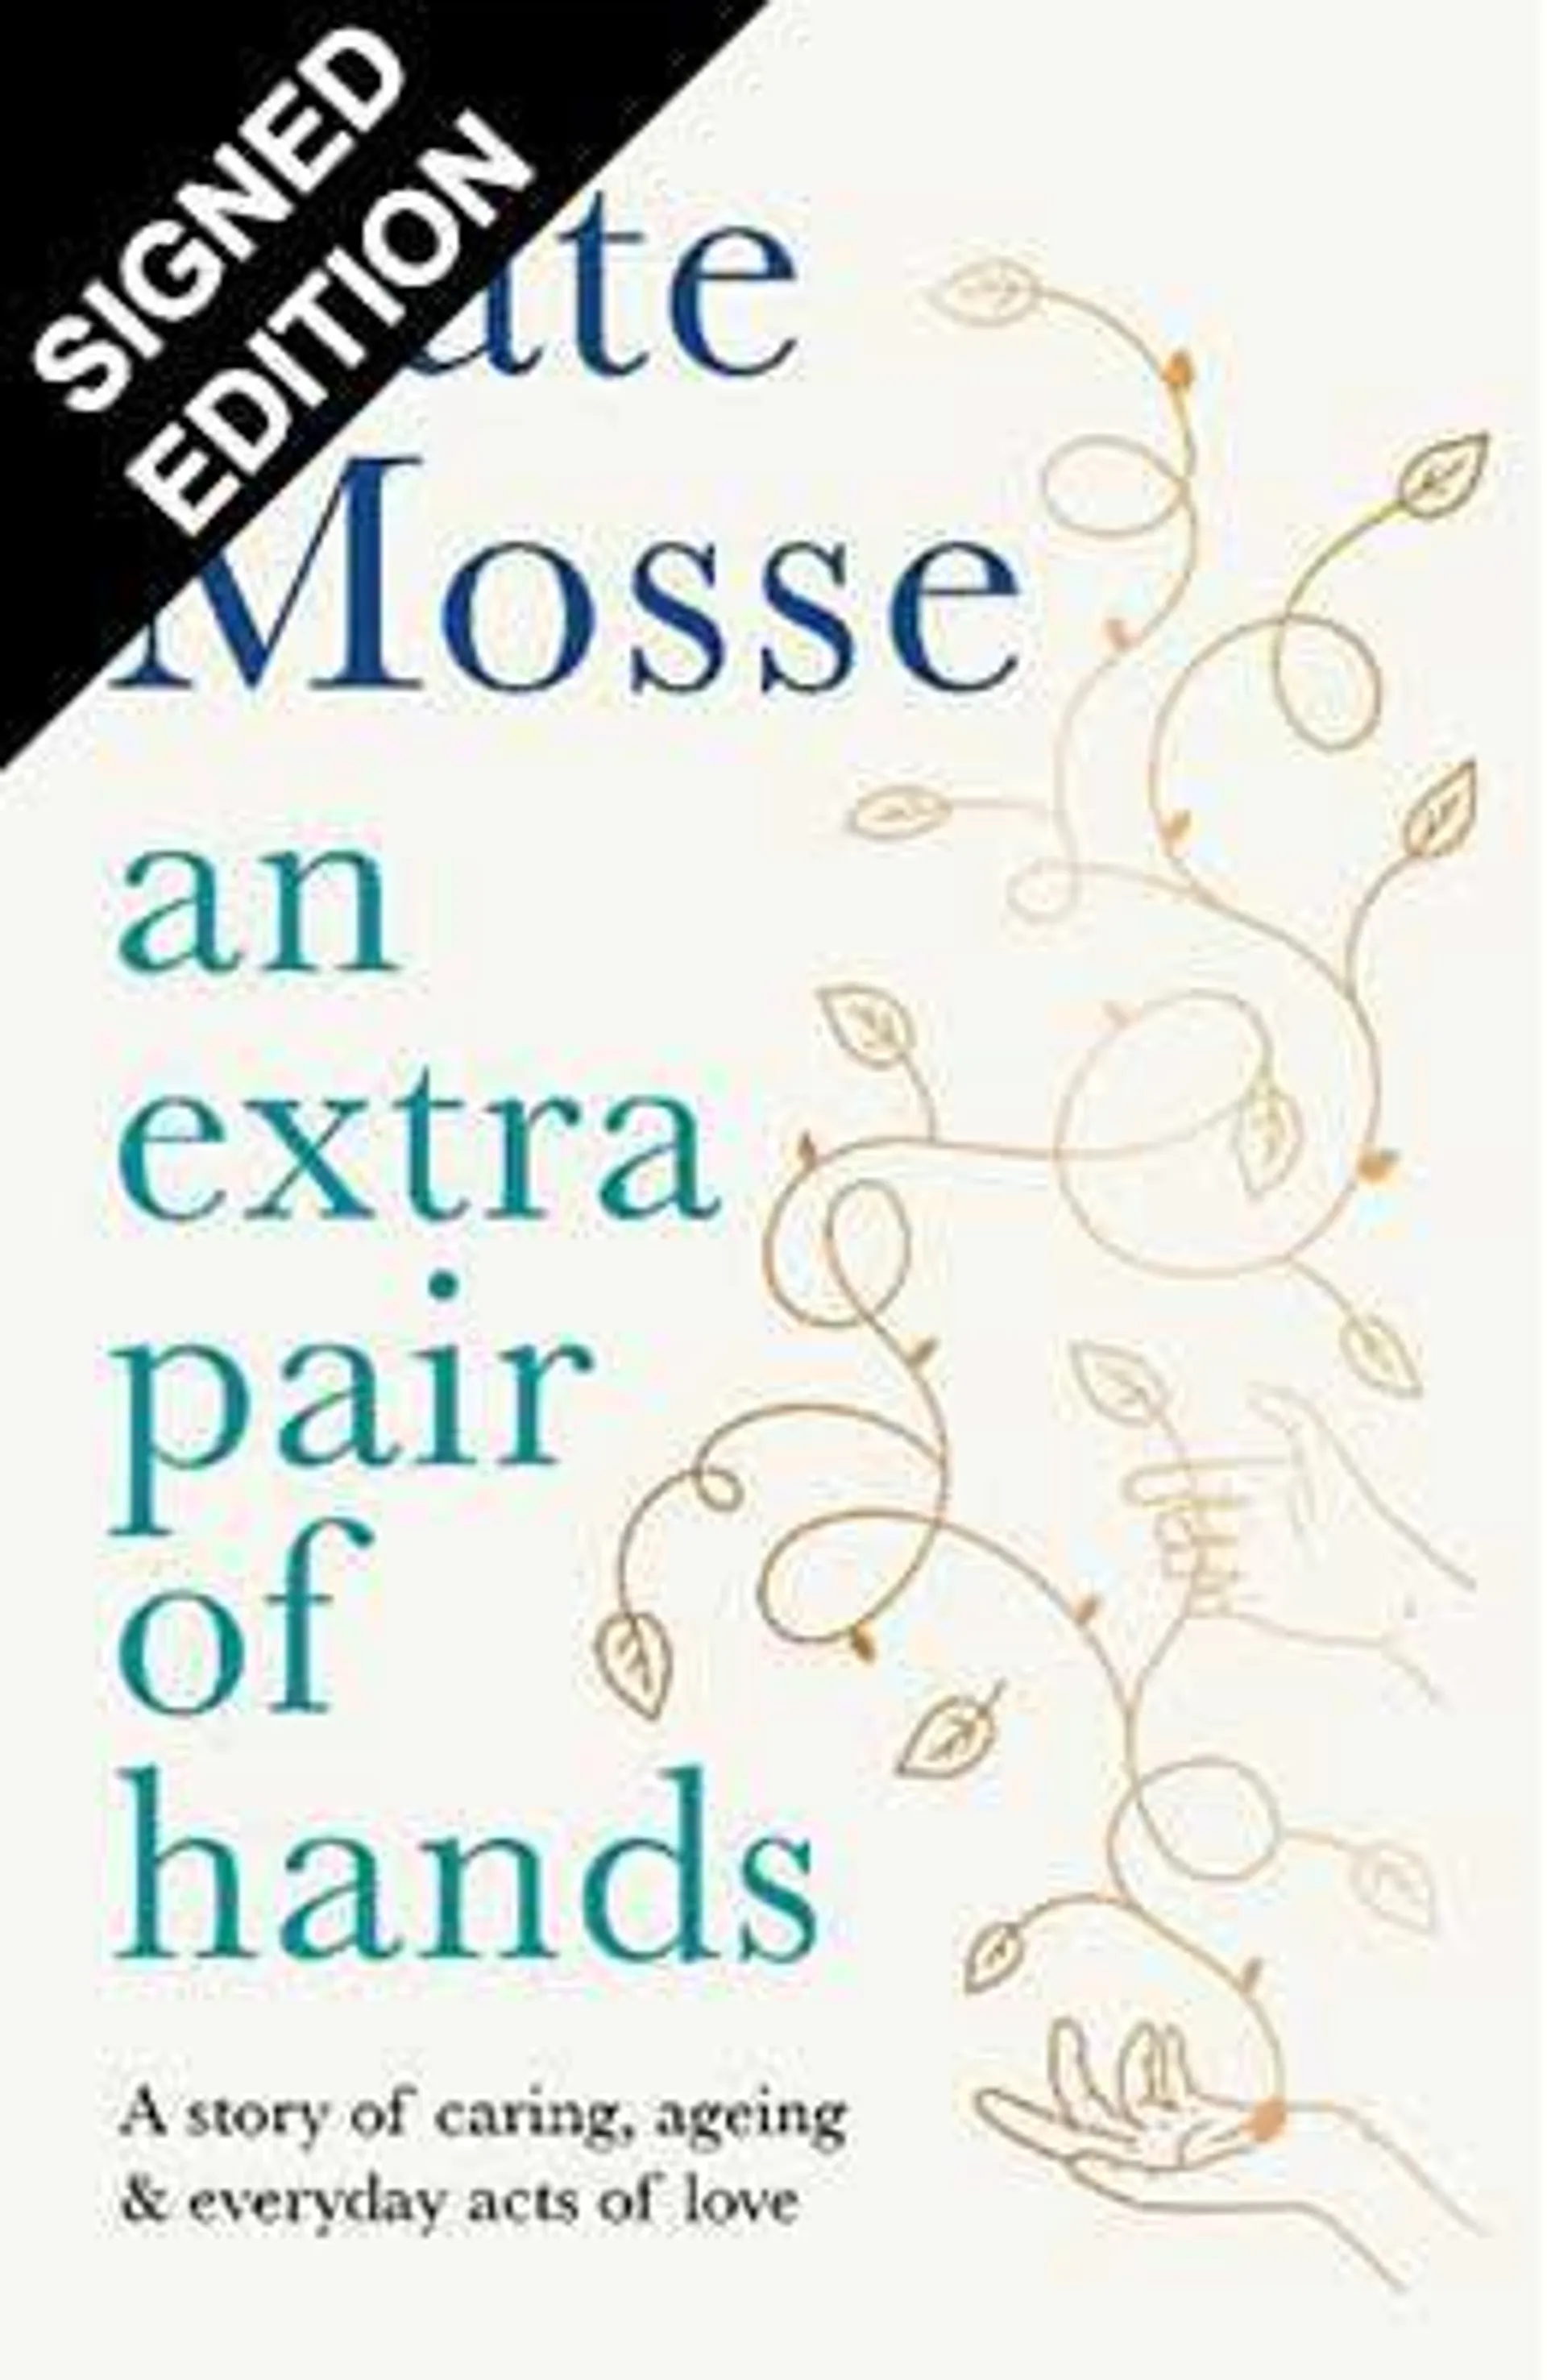 An Extra Pair of Hands: A story of caring, ageing and everyday acts of love - Signed Edition (Hardback)